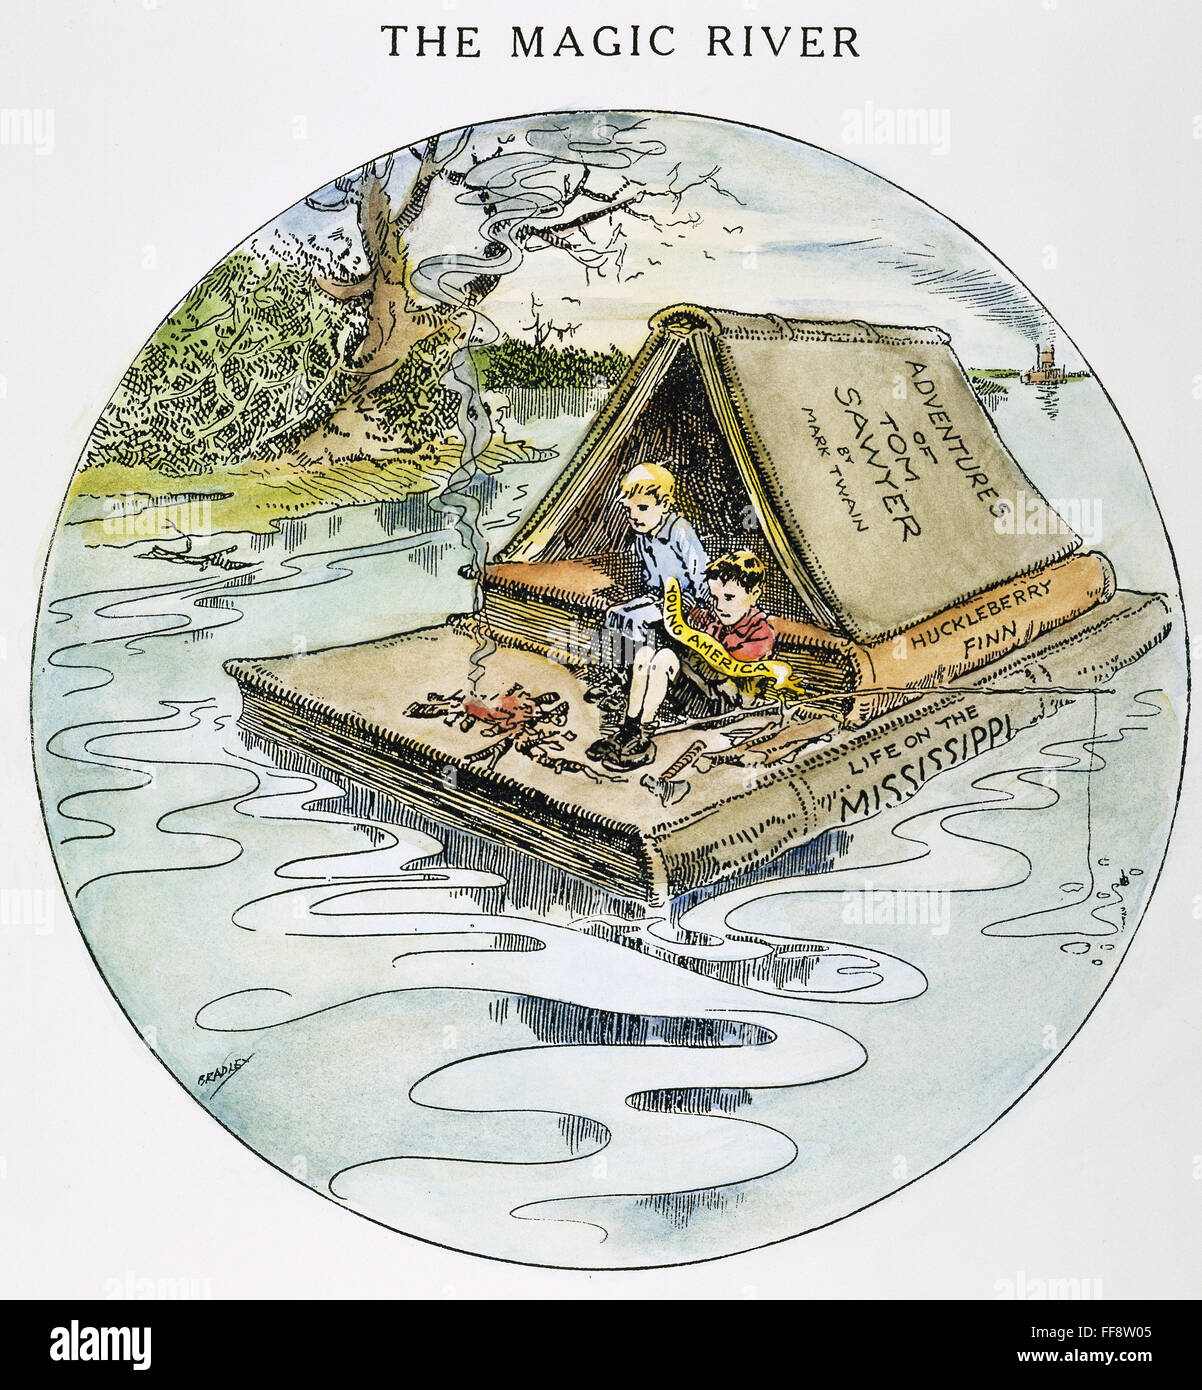 CLEMENS: TOM & HUCK, 1910. /nSamuel Clemens' creations, Tom Sawyer and Huckleberry Finn, floating down the Mississippi on a literary raft. Cartoon by Luther D. Bradley on the occasion of Clemens' death, 21 April 1910. Stock Photo